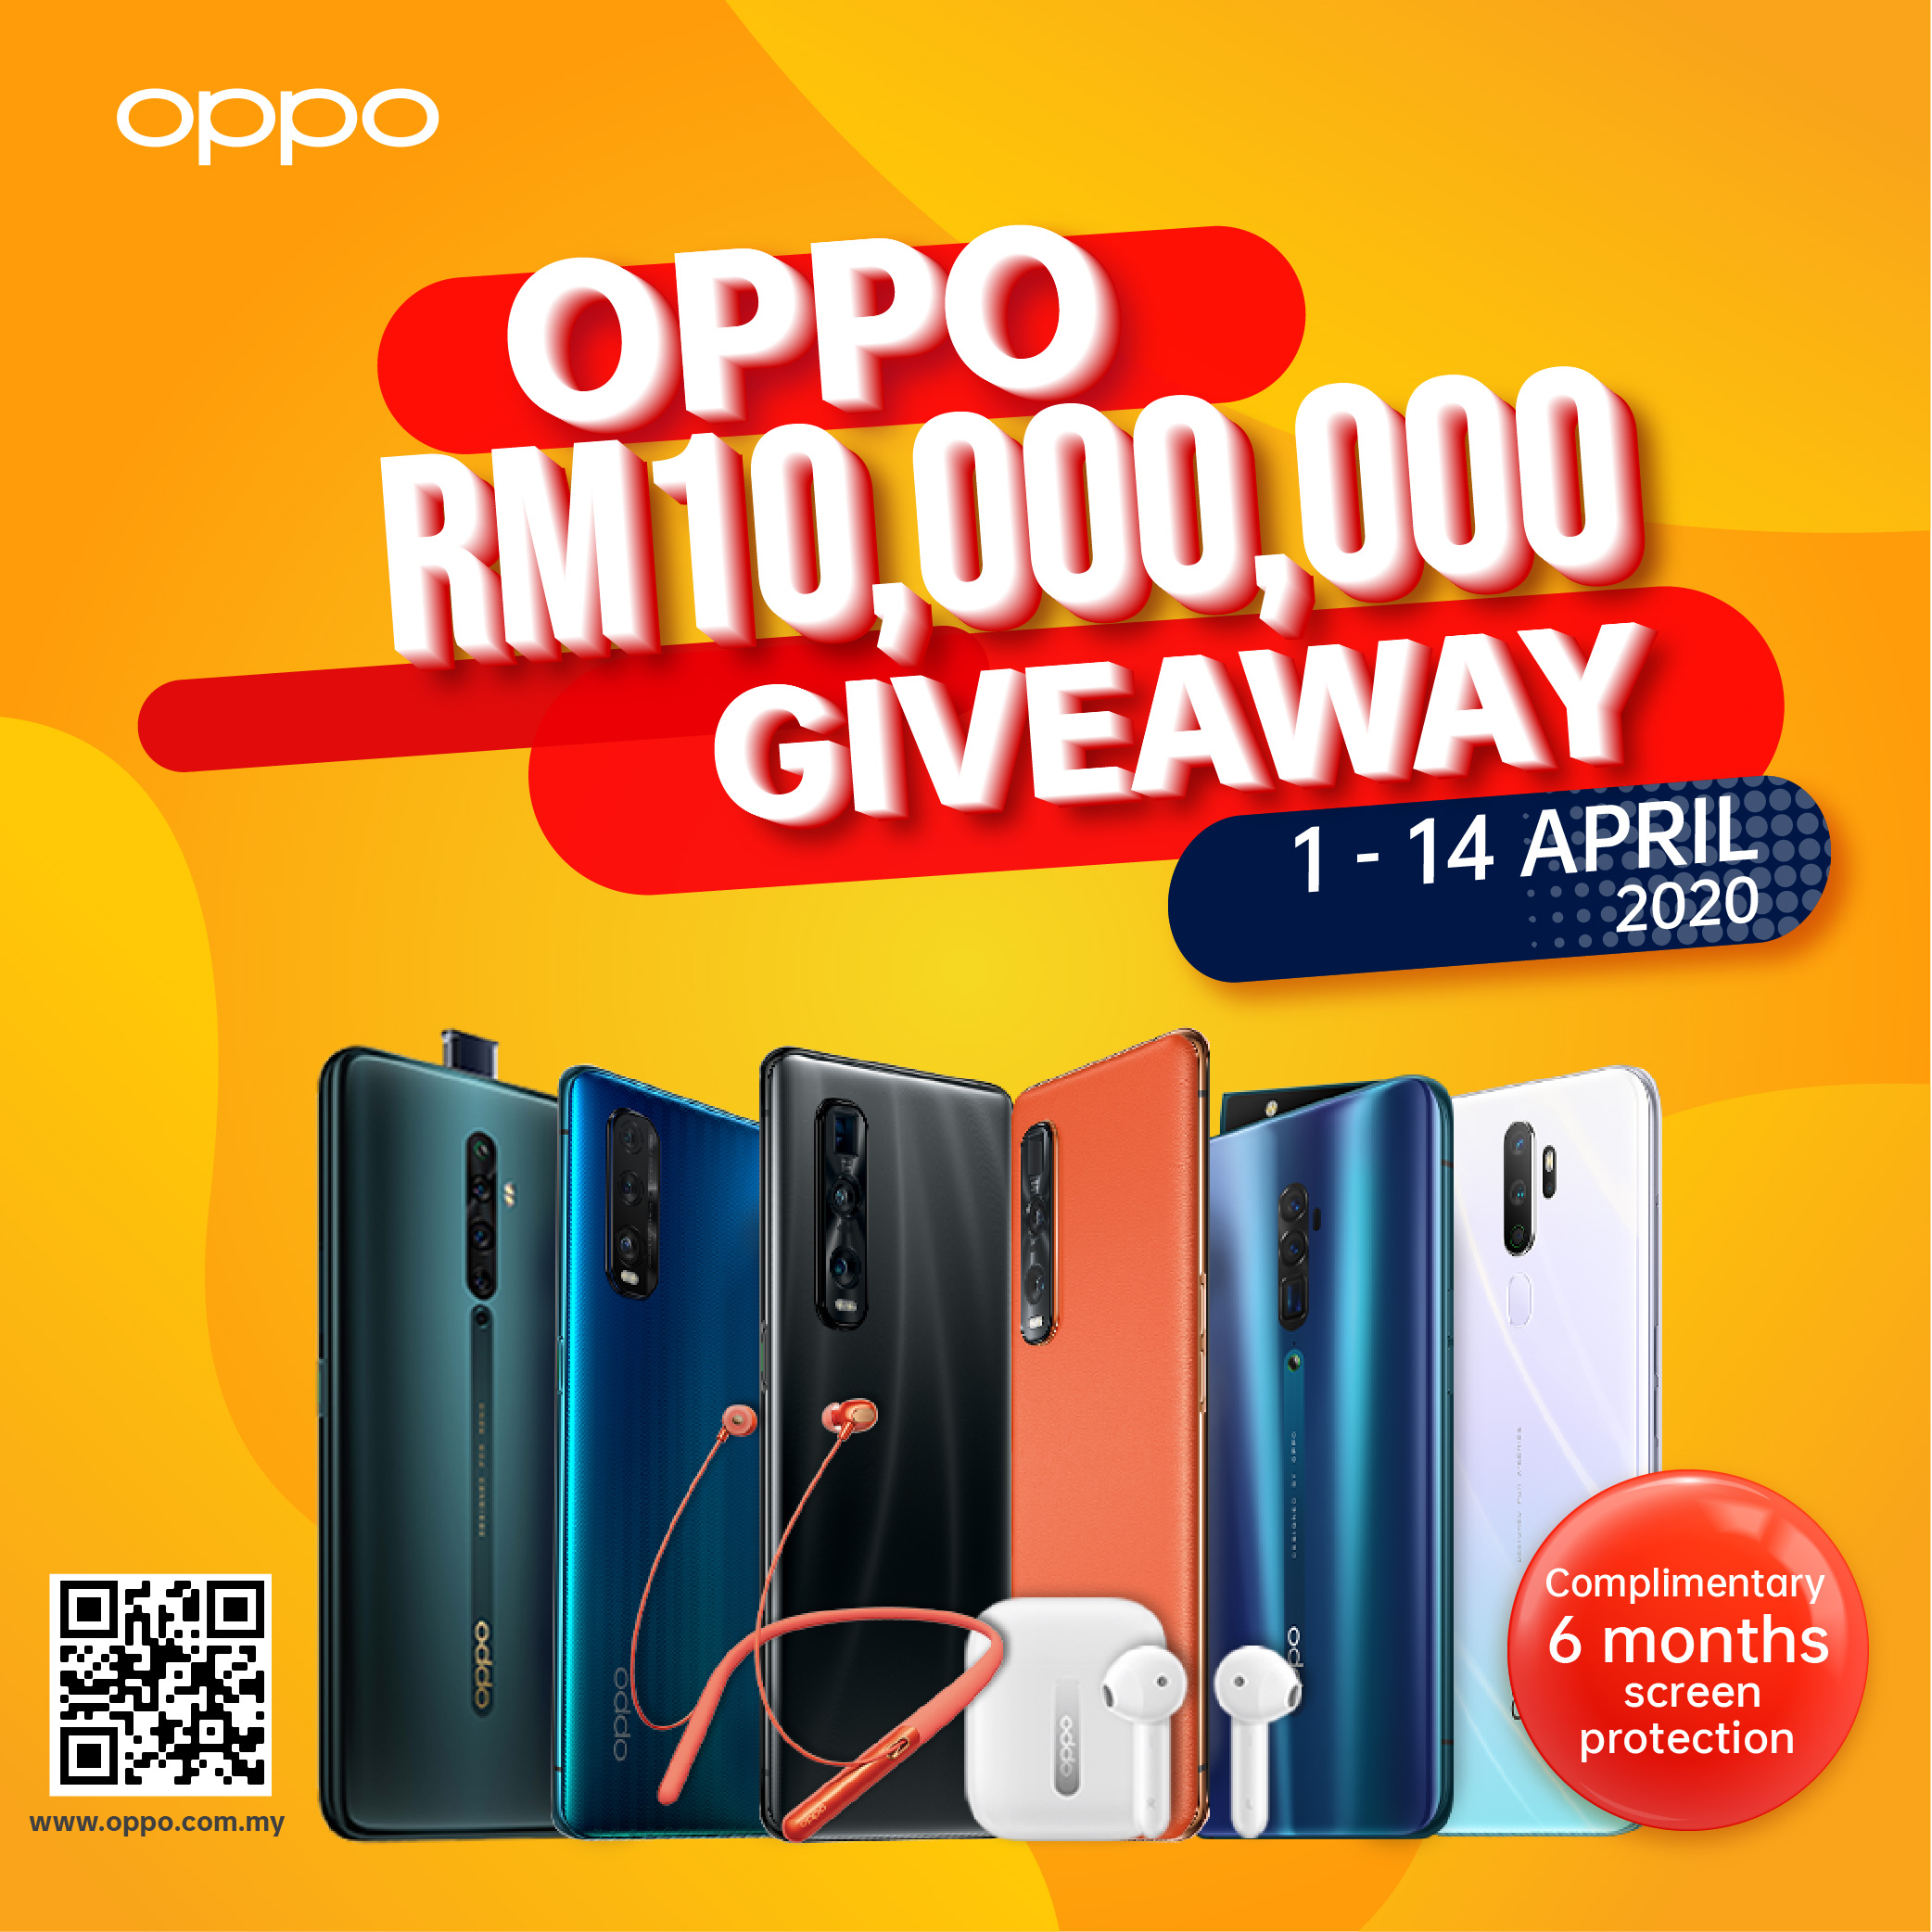 OPPO 10mil discount is back